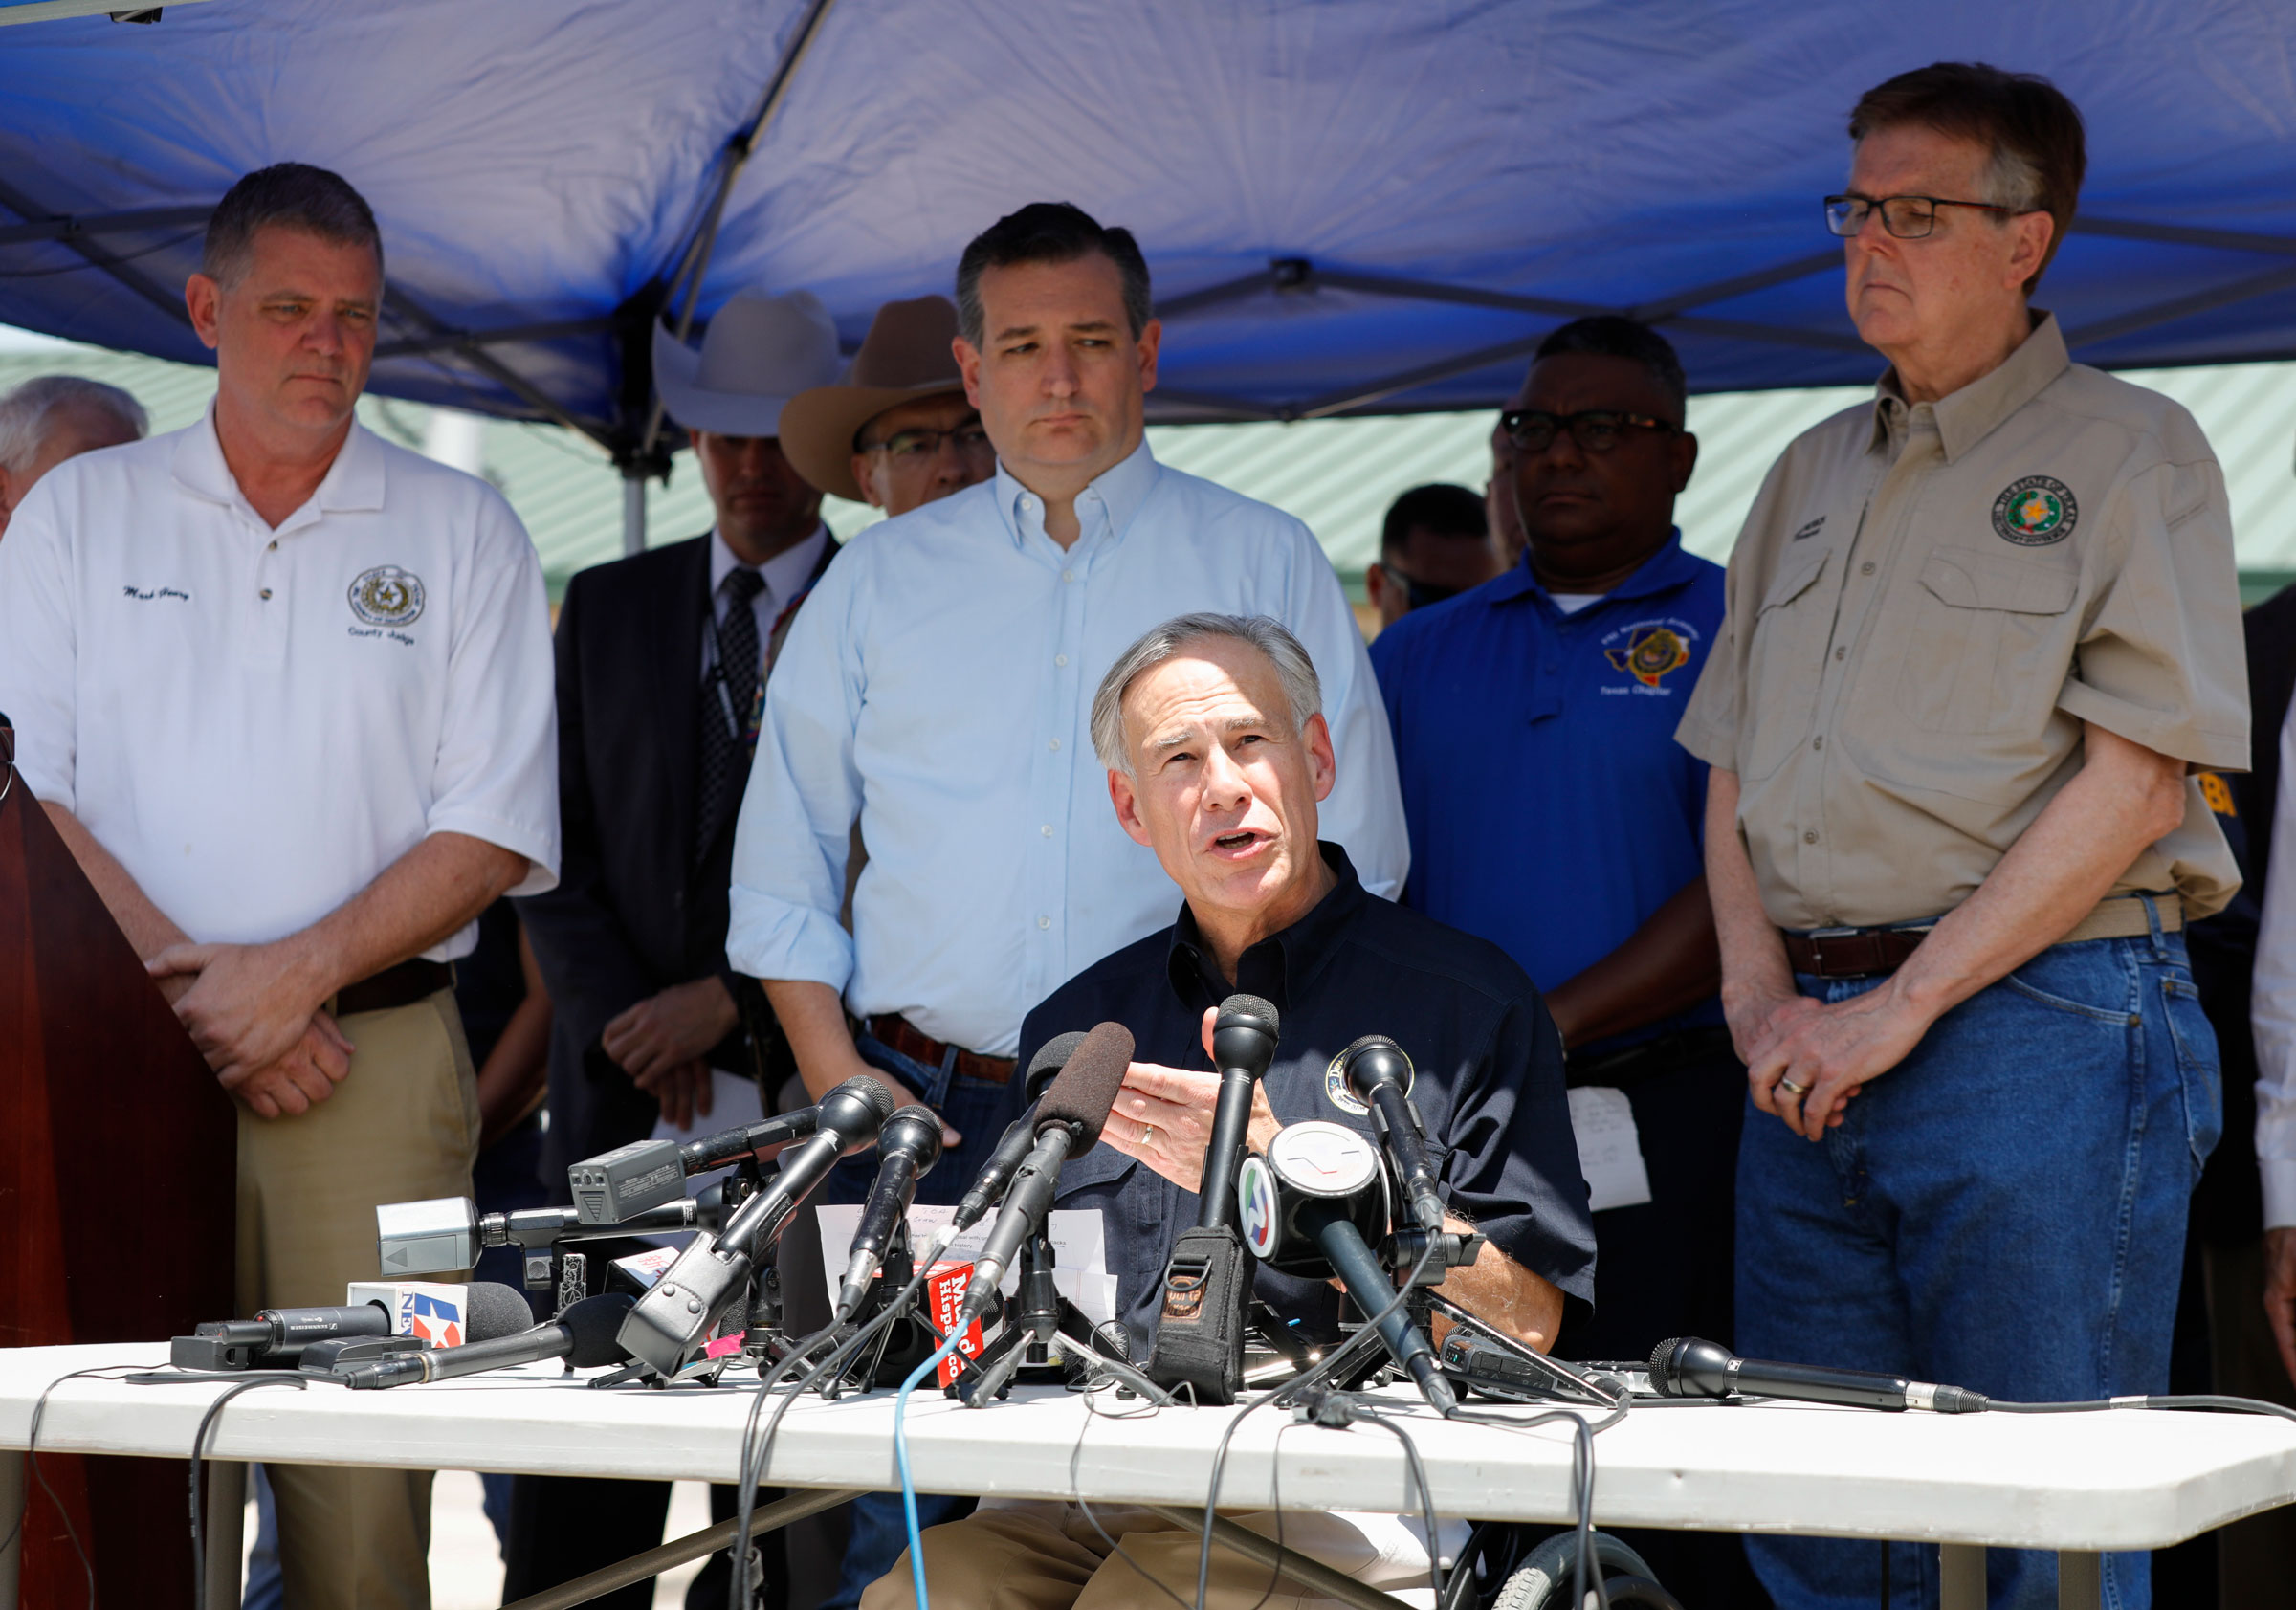 Mark Henry, Ted Cruz, Greg Abbott and Dan Patrick speak to the media during a press conference about the shooting incident at Santa Fe High School